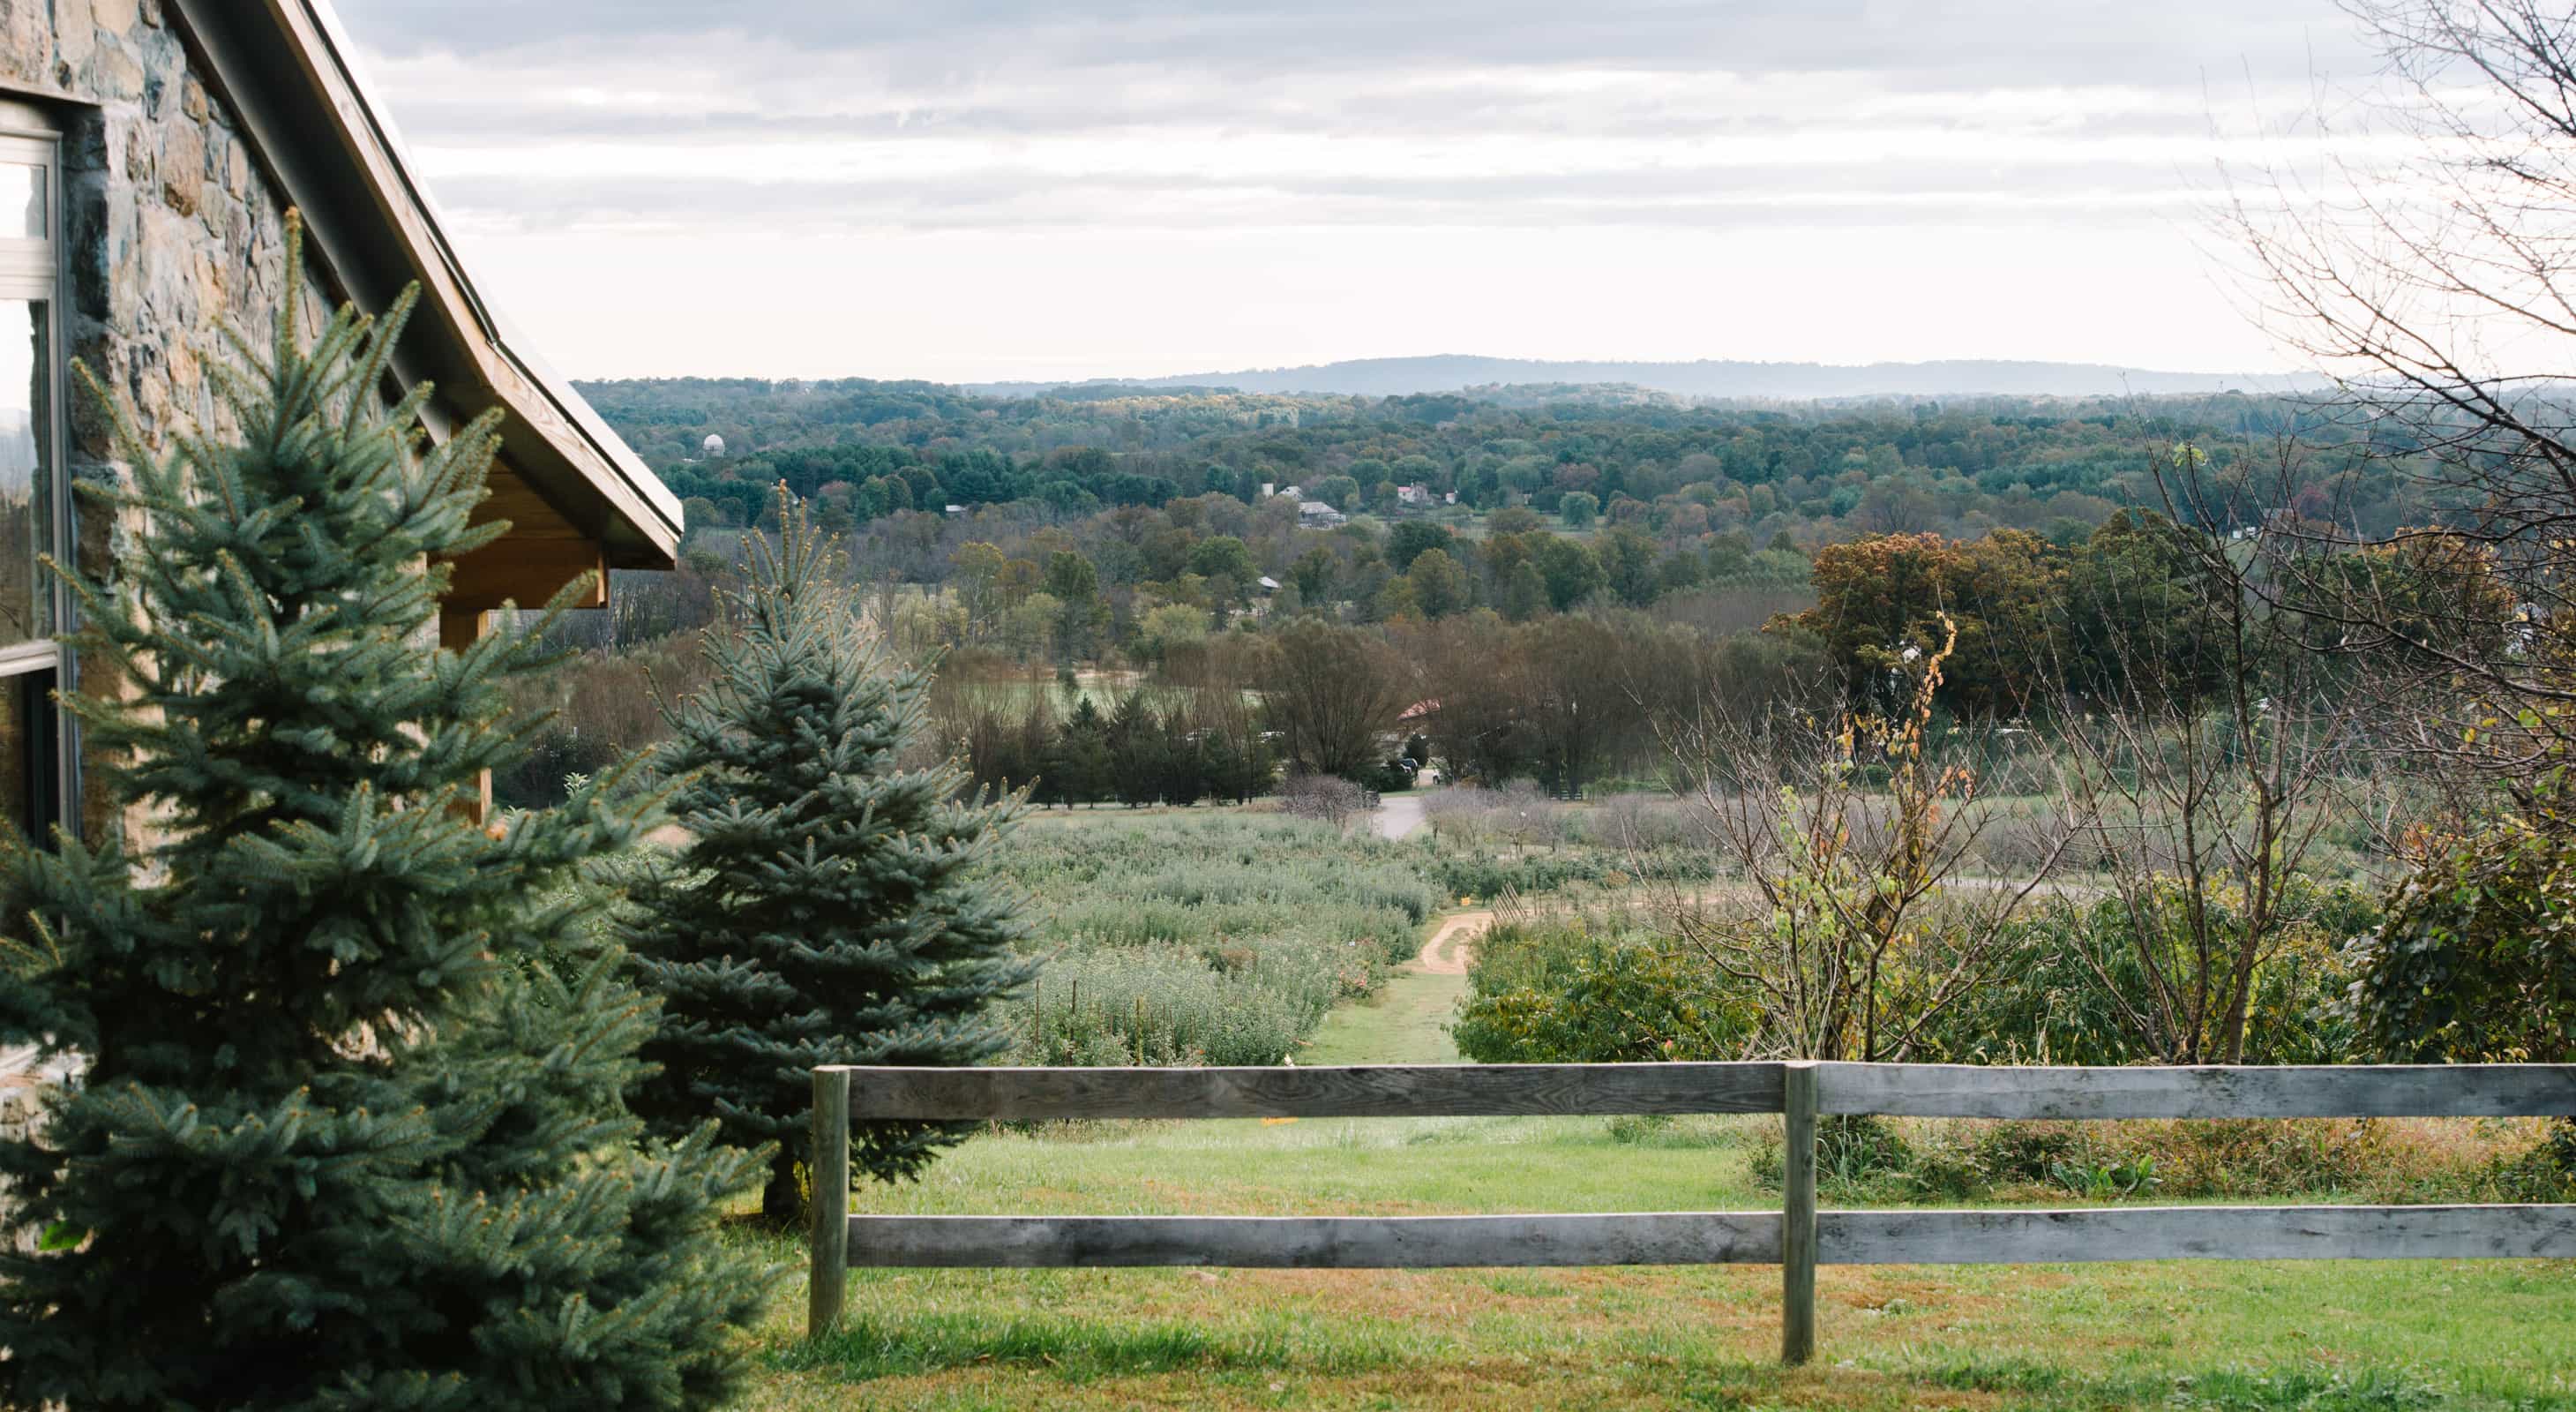 Experience the view at our Northern Virginia getaway cottages